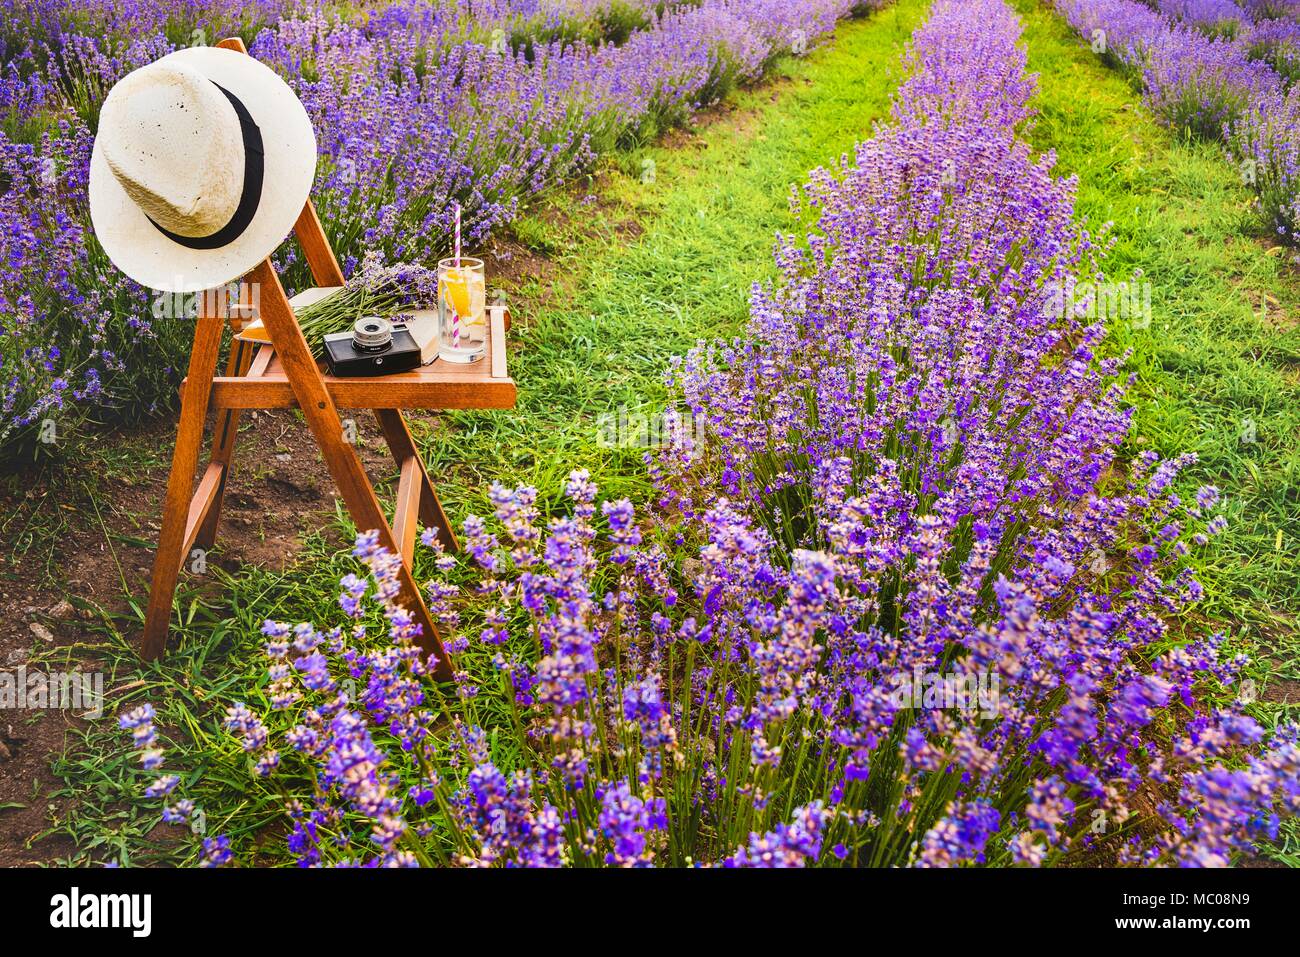 A chair with a hanged over hat, an open book, a retro camera and a bunch of lavender flowers between the blooming lavender rows under the summer sunse Stock Photo